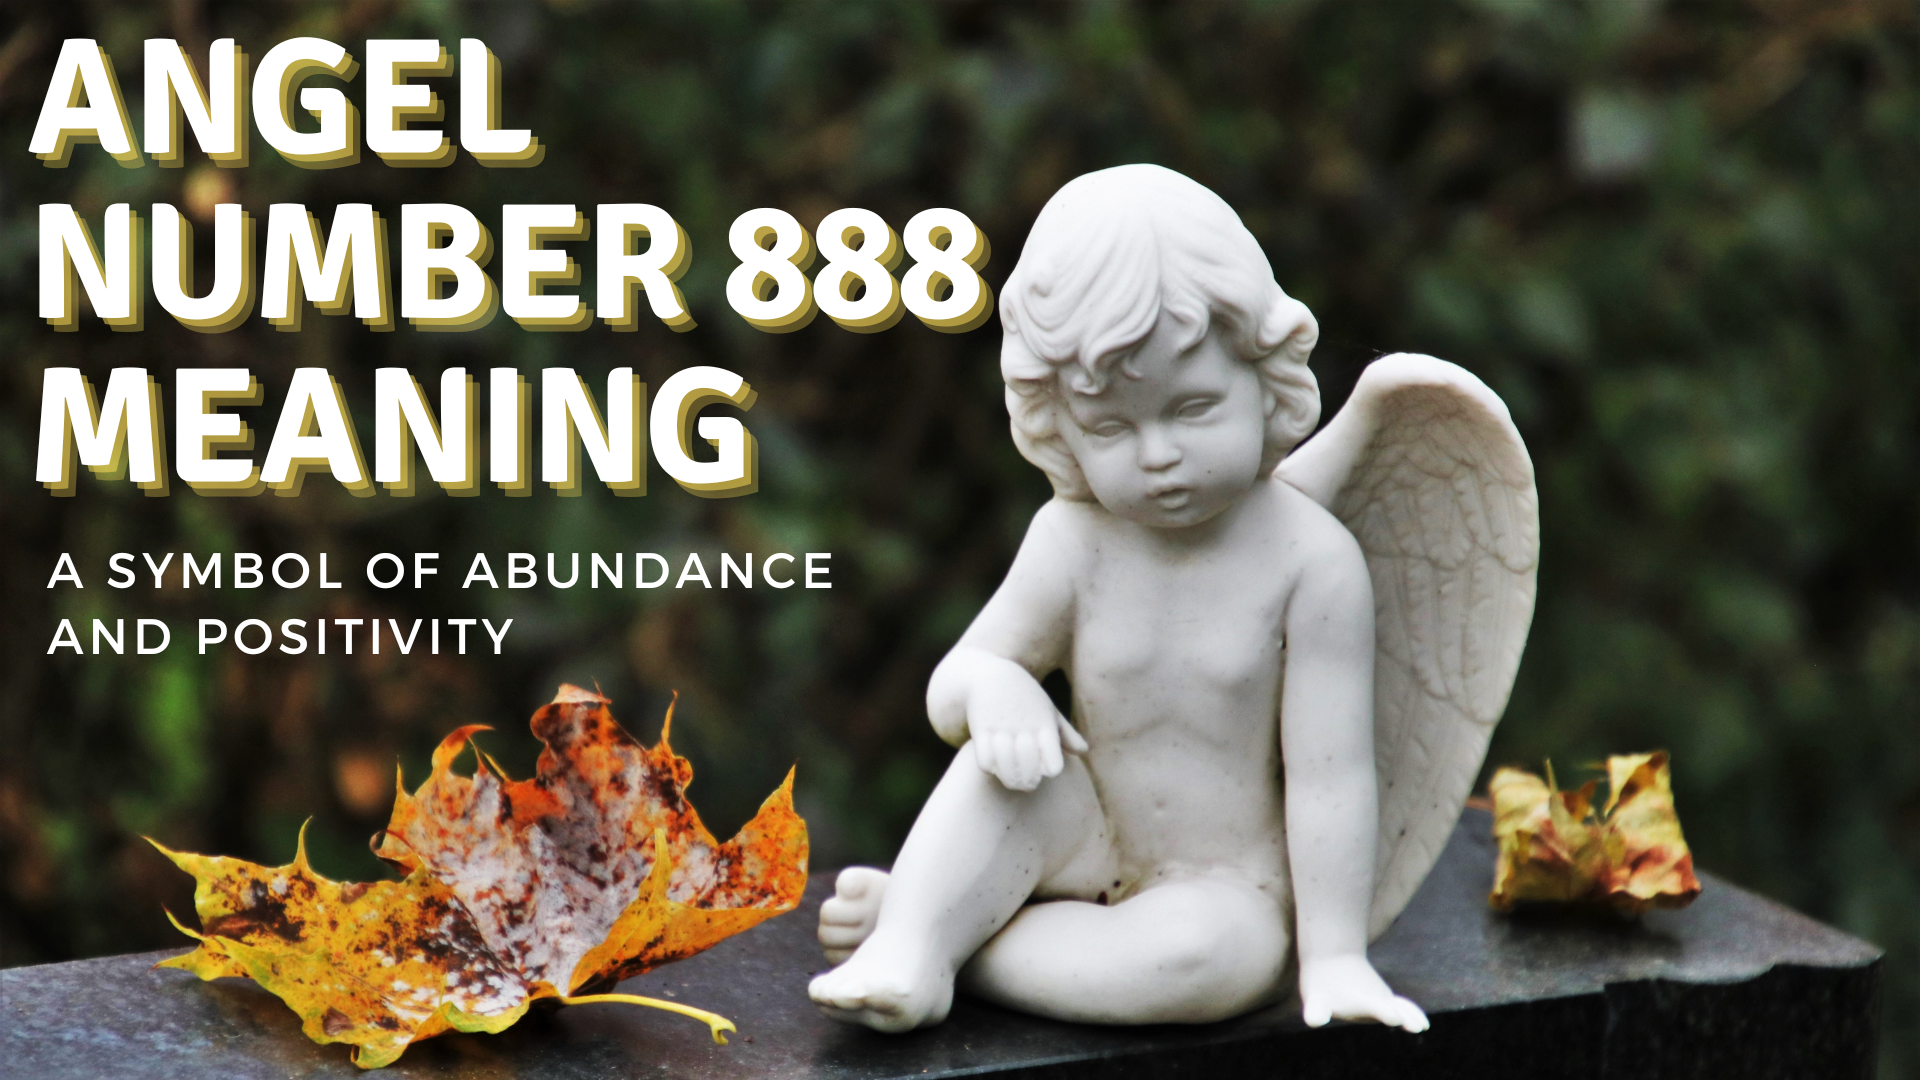 Angel Number 888 Meaning - A Symbol Of Abundance And Positivity